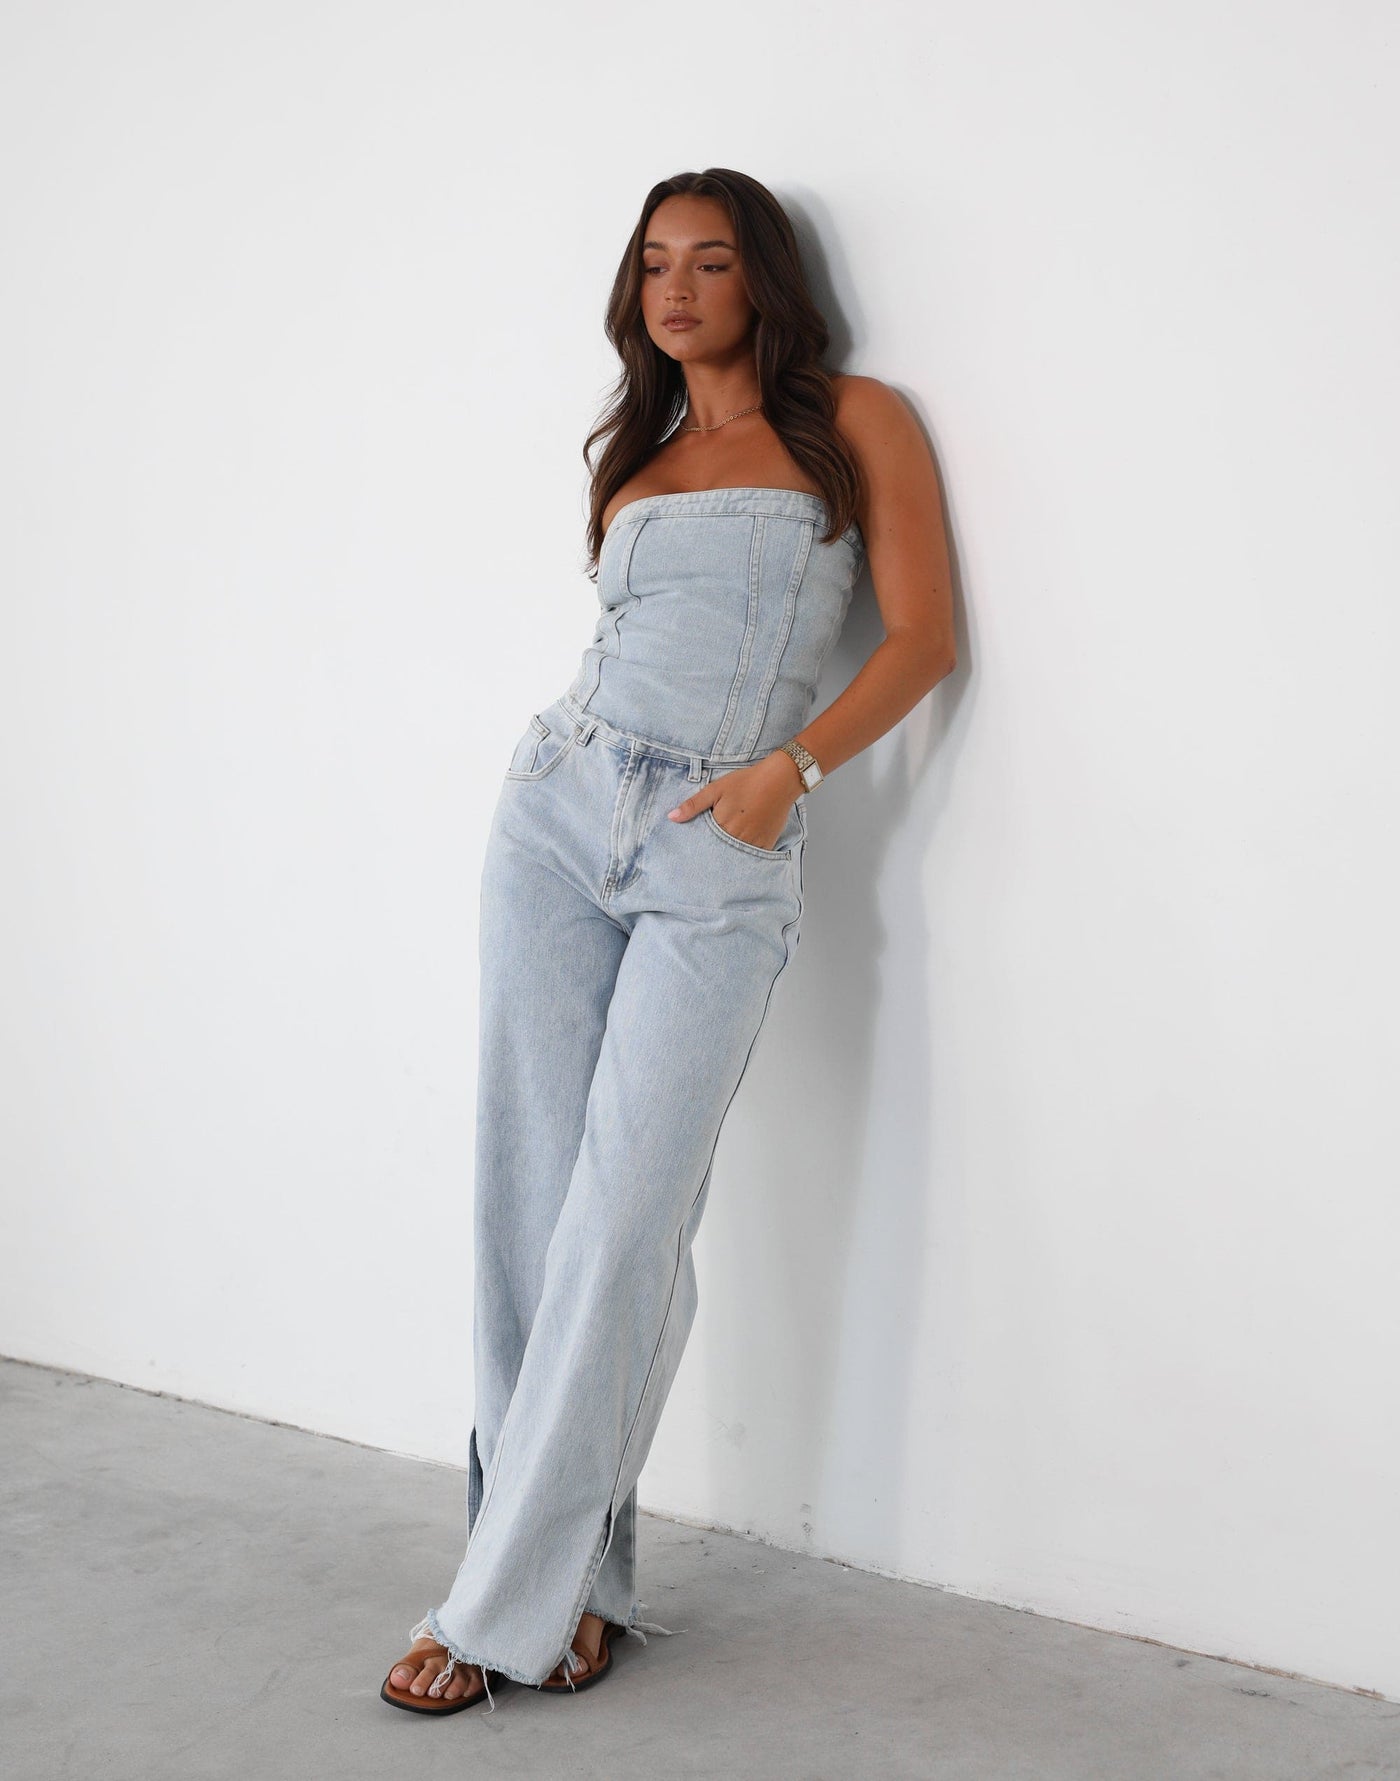 Tommy Jeans (Light Vintage) | Charcoal Exclusive - High Waisted Jeans With Slits - Women's Pants - Charcoal Clothing